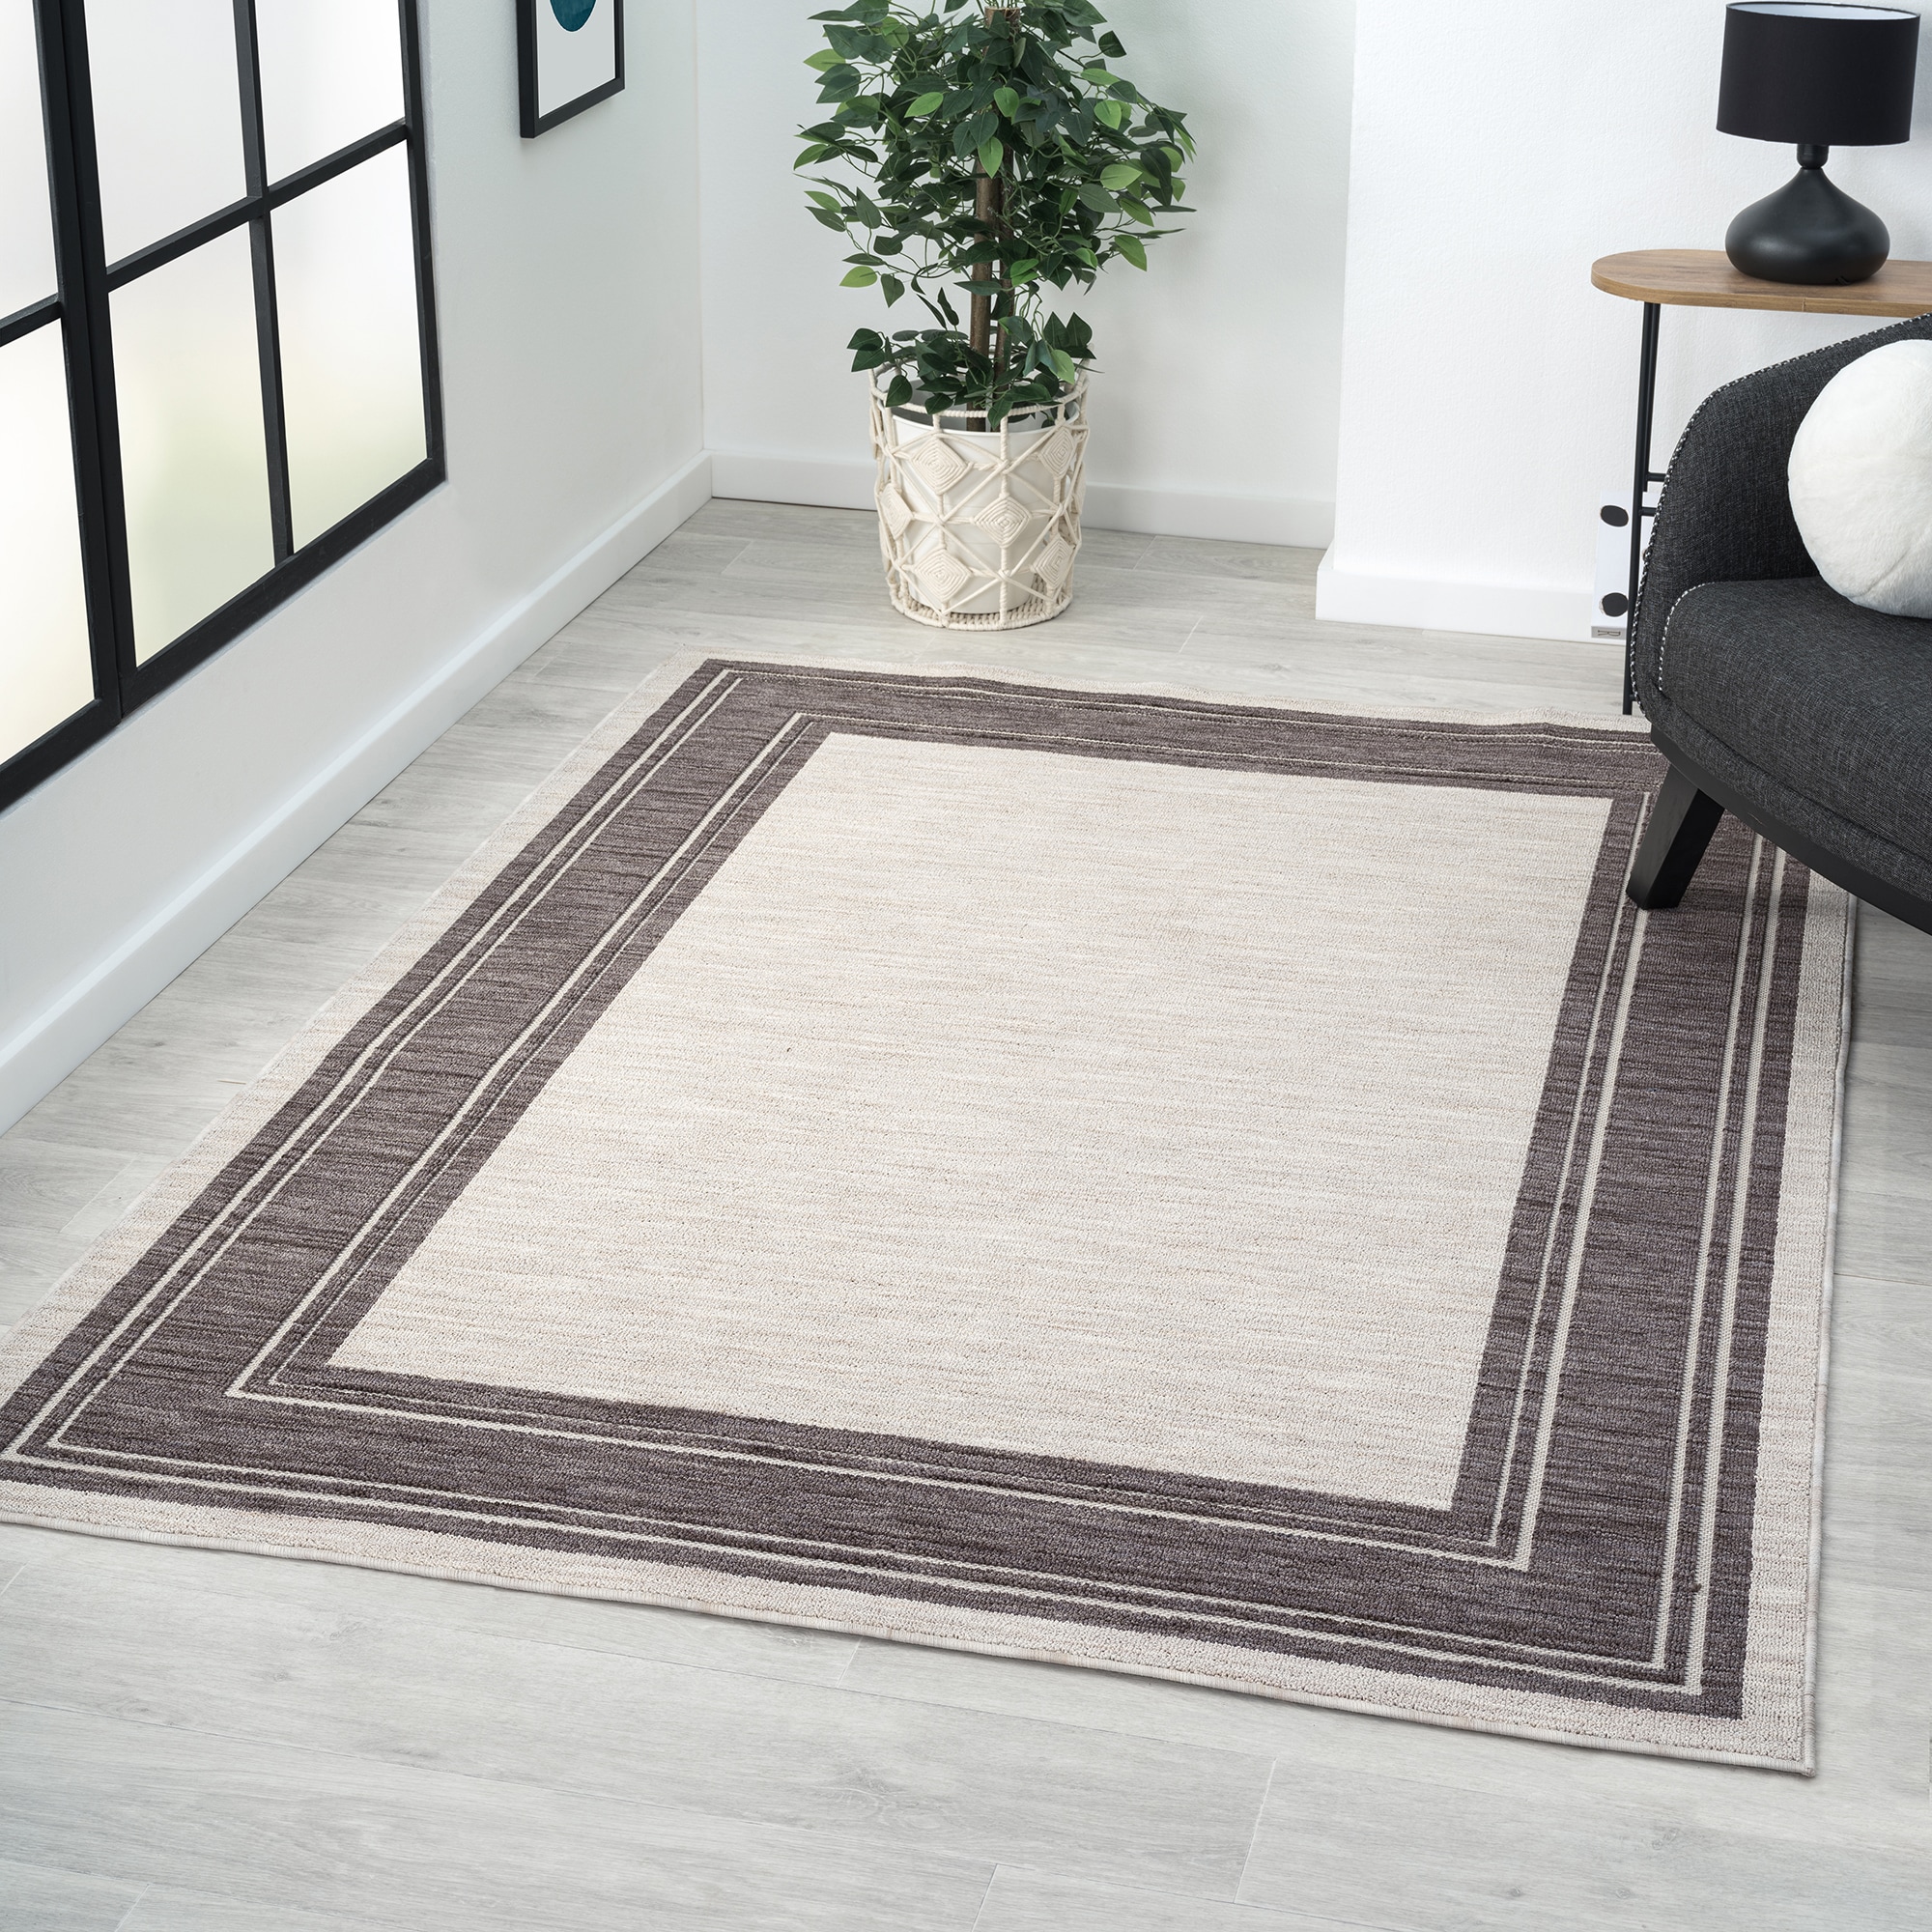 Quentisha Abstract Power Loom Polypropylene Area Rug in Gray 17 Stories Rug Size: Rectangle 2'8 x 4'11